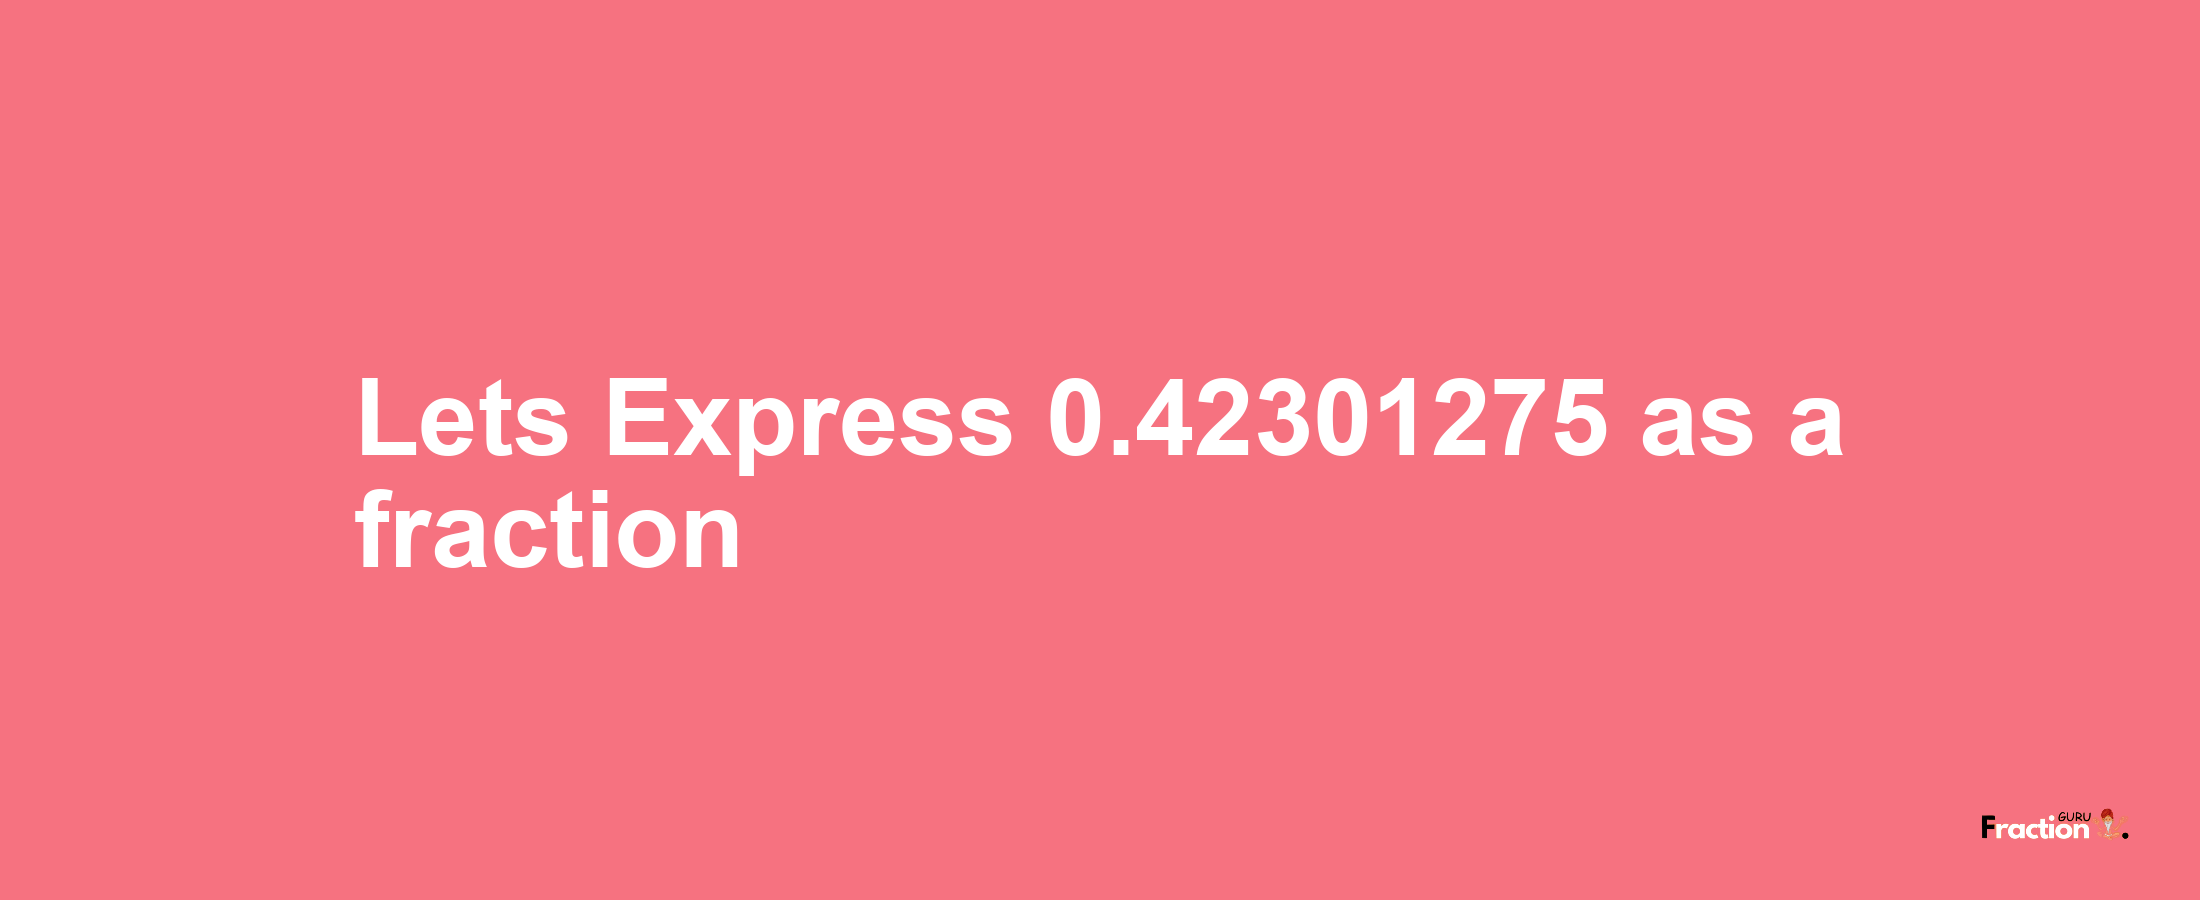 Lets Express 0.42301275 as afraction